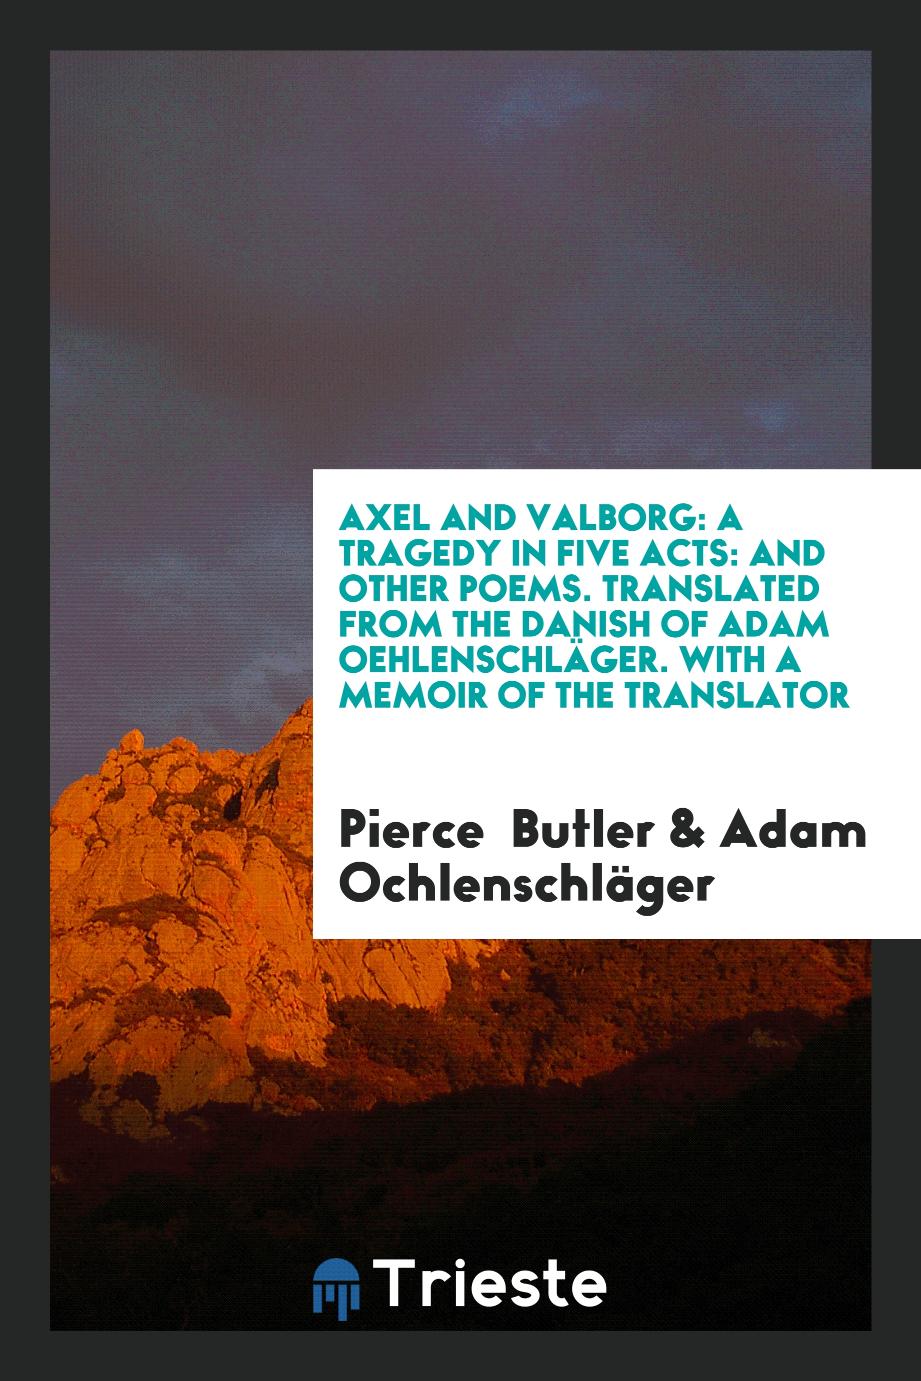 Axel and Valborg: A Tragedy in Five Acts: And Other Poems. Translated from the Danish of Adam Oehlenschläger. With a Memoir of the Translator